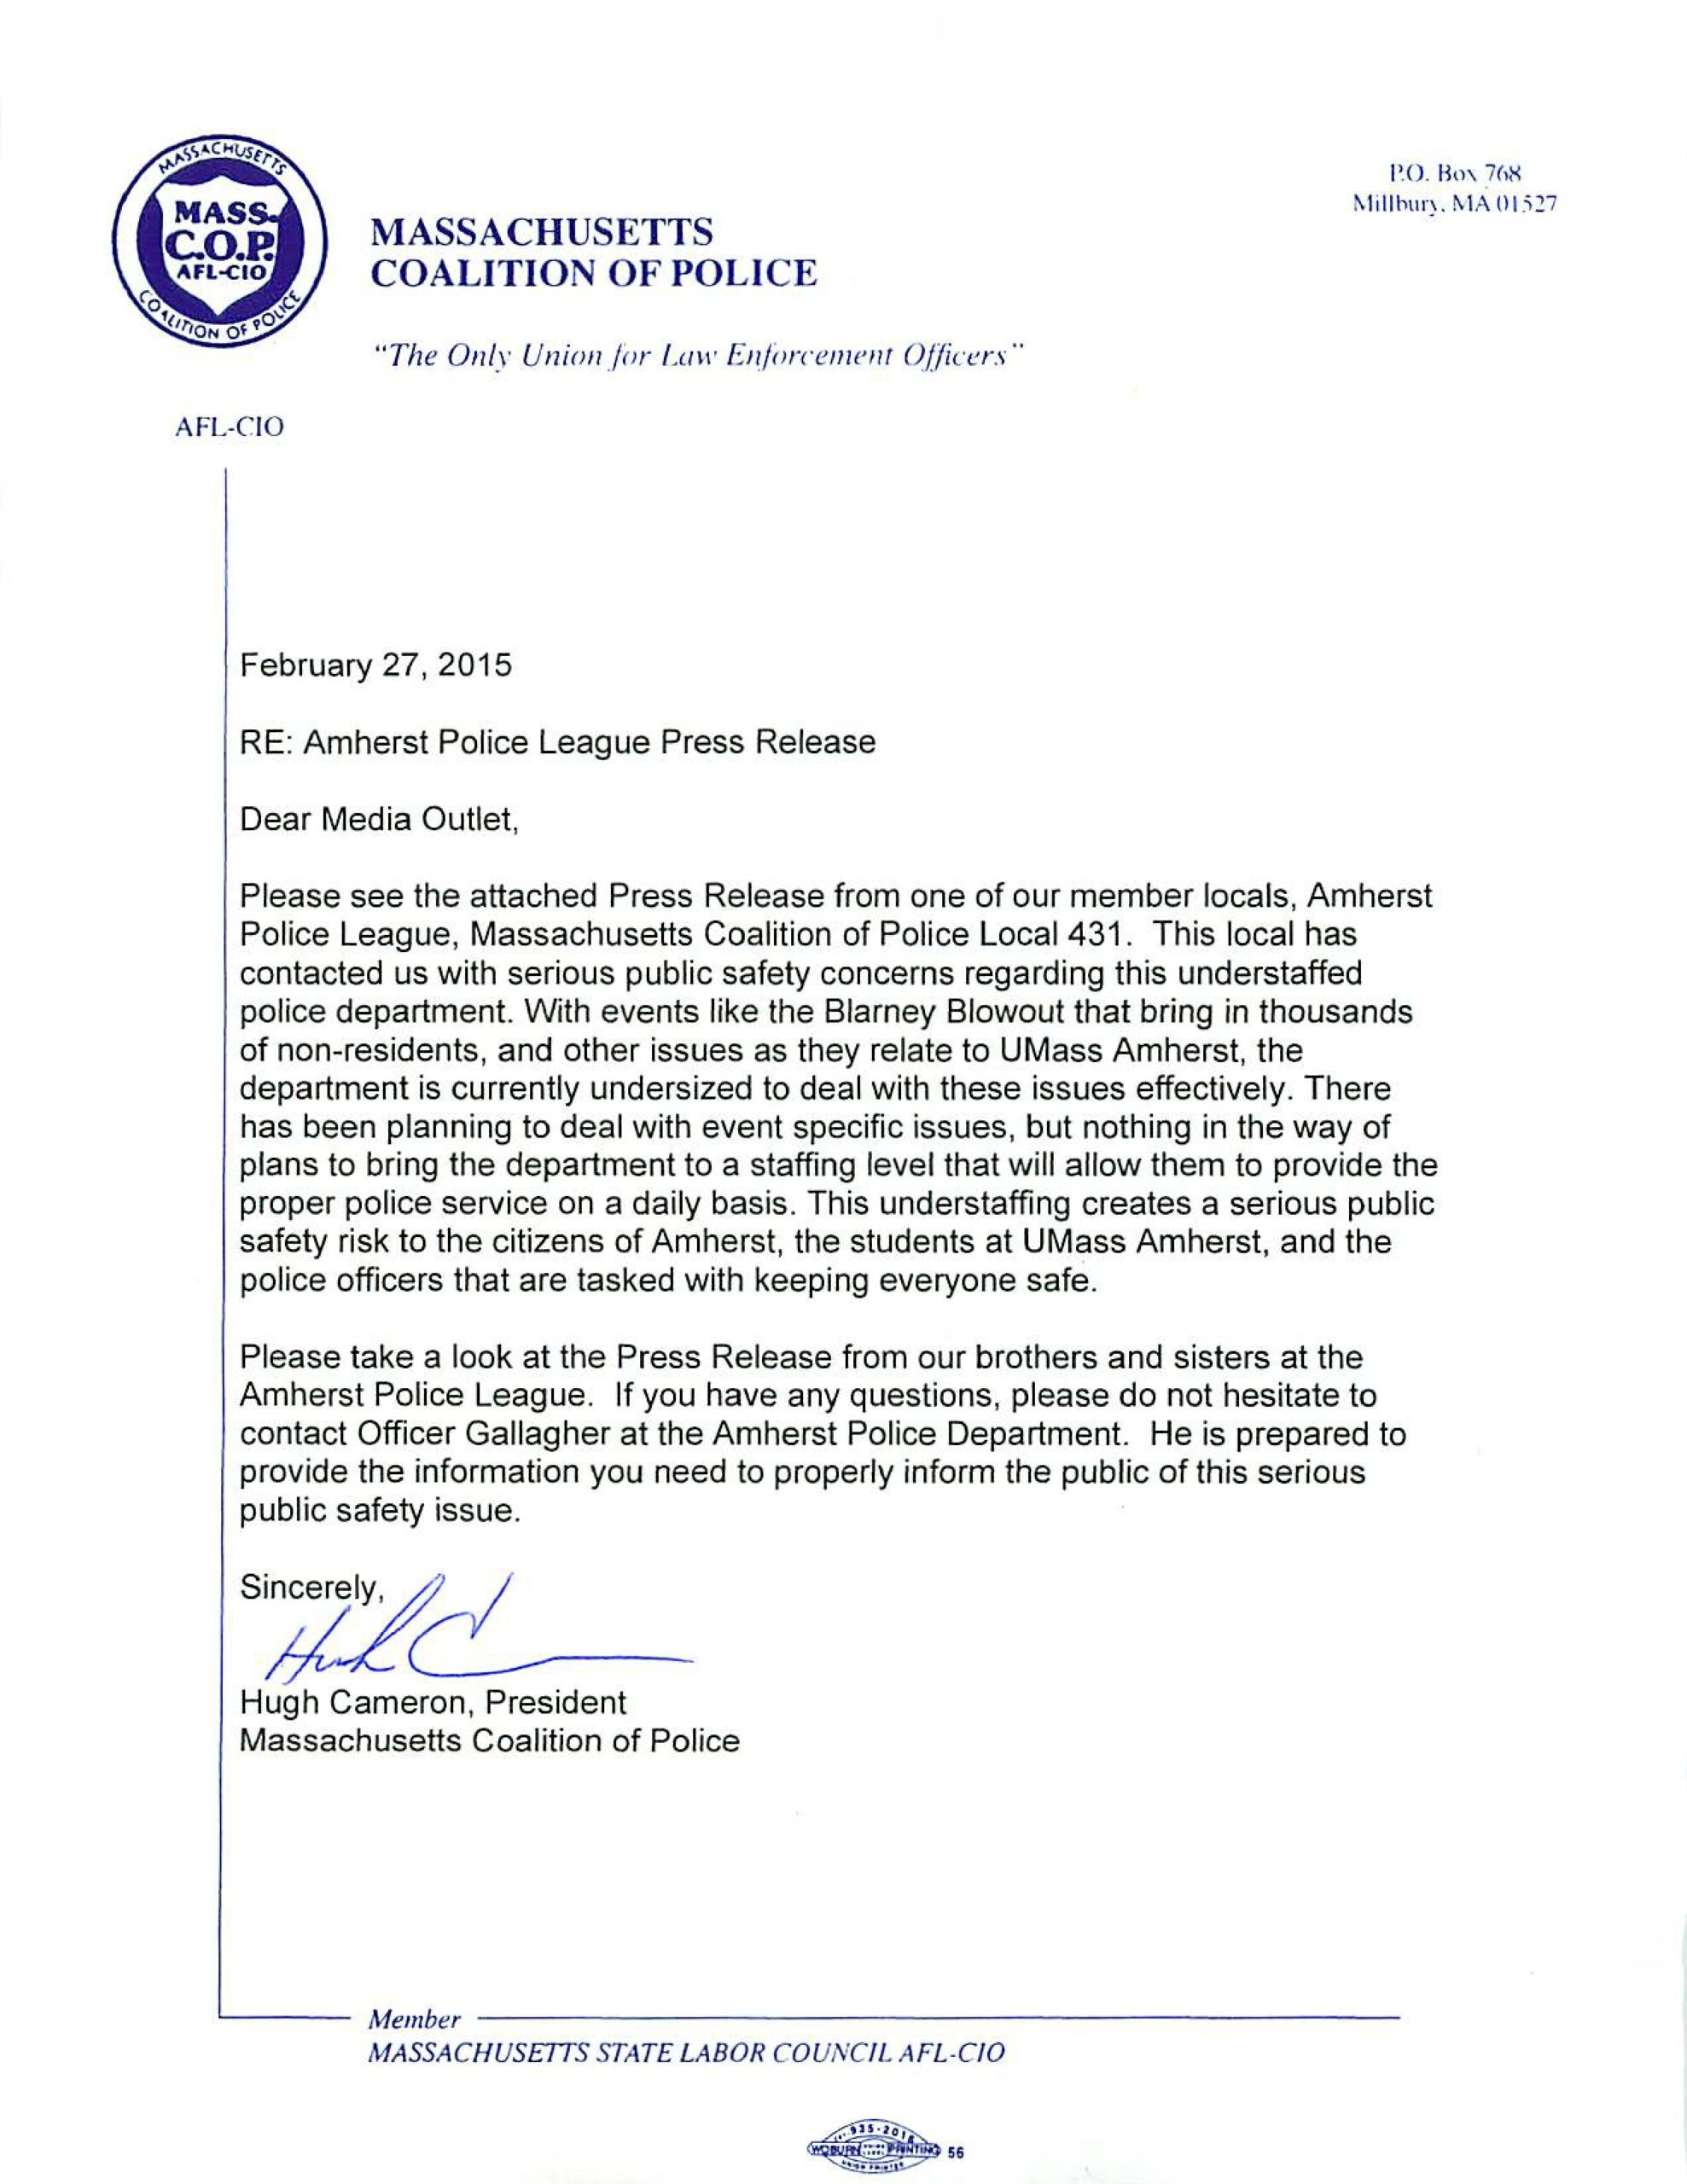 Amherst Police League Press Release